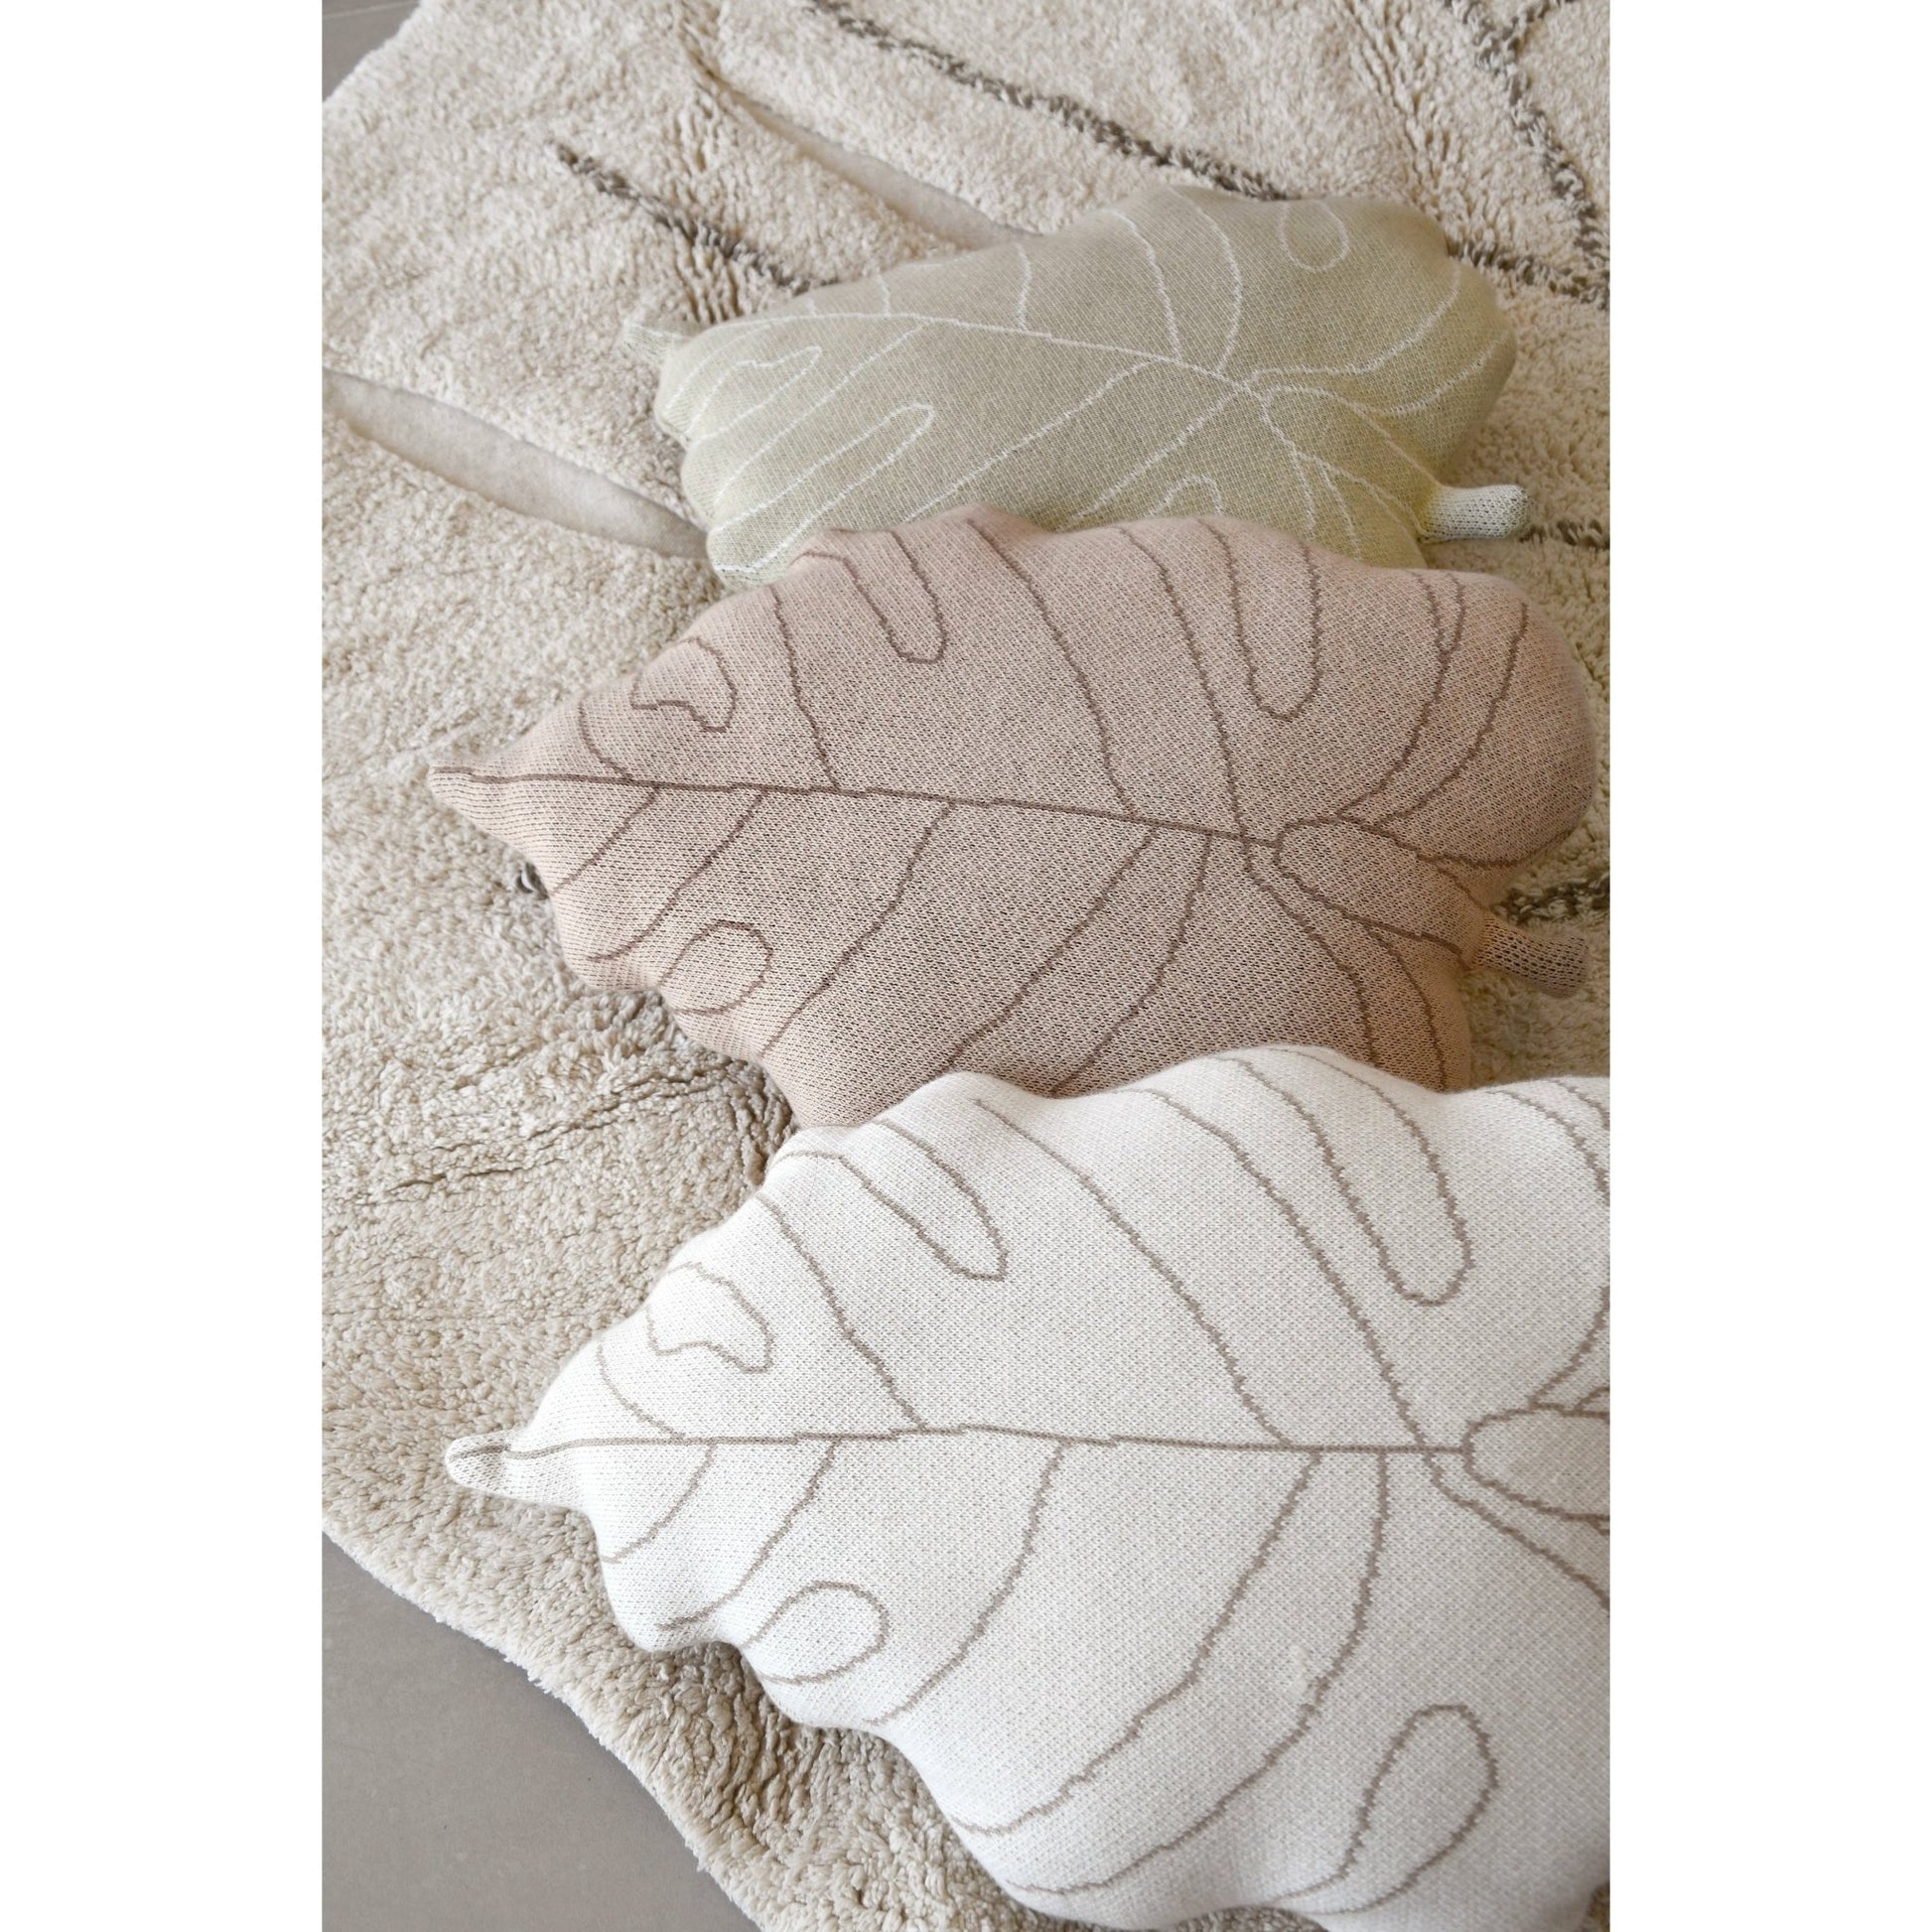 Lorena Canals Knitted cushion Baby Leaf Olive - Fancy Nursery